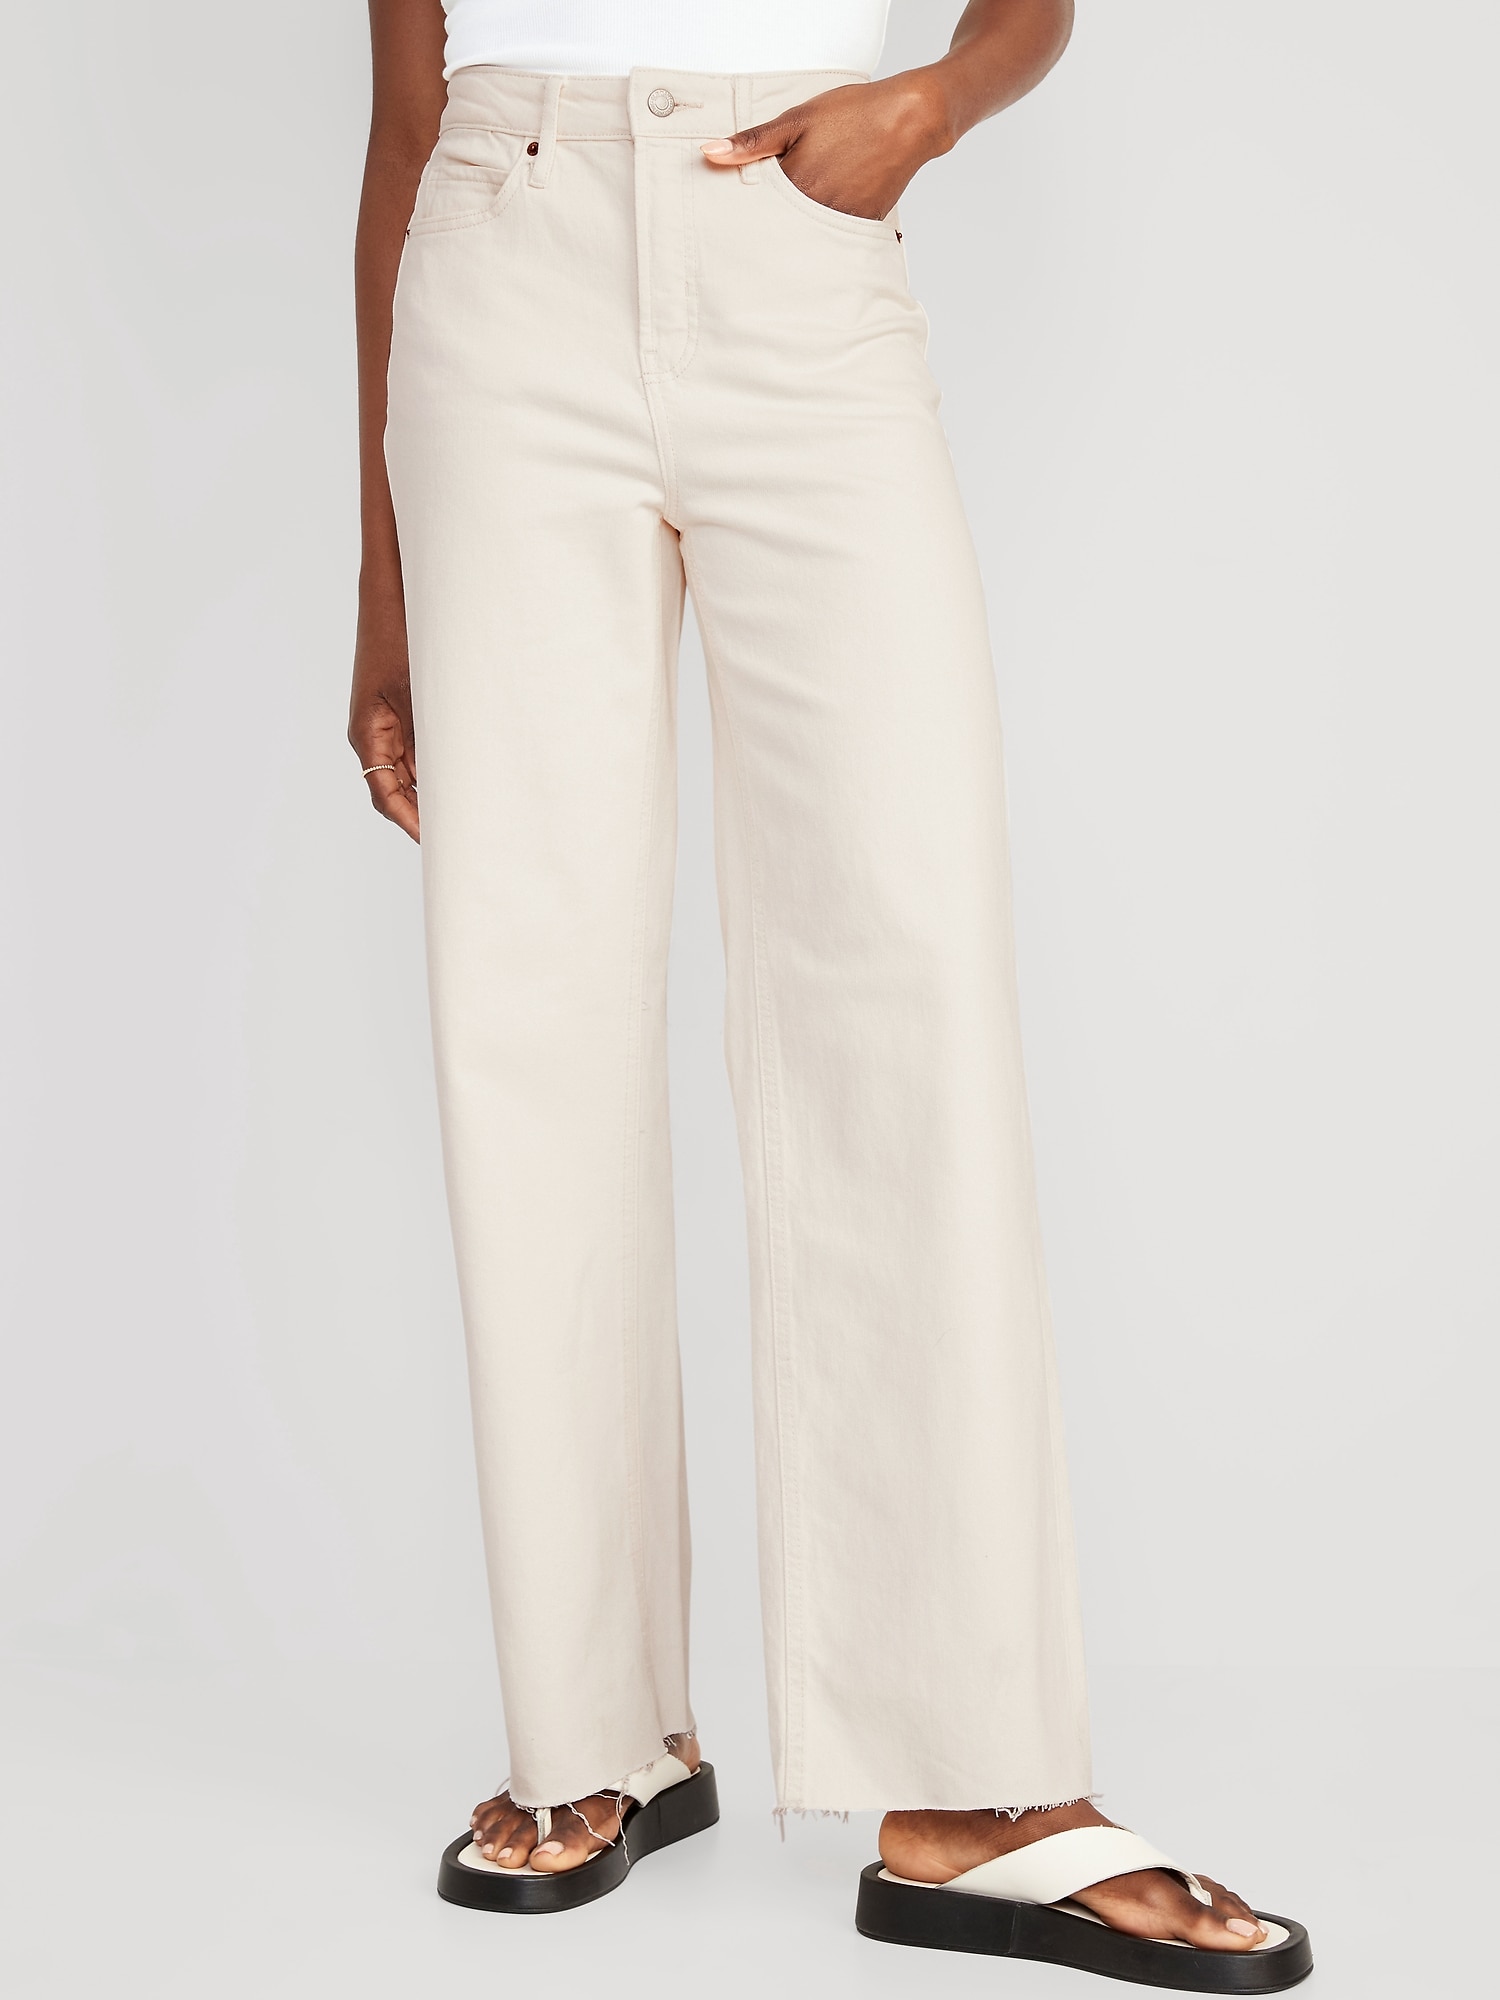 WOMEN'S plus size 18 High-Rise Relaxed Fit Straight Trousers - A New Day  cream